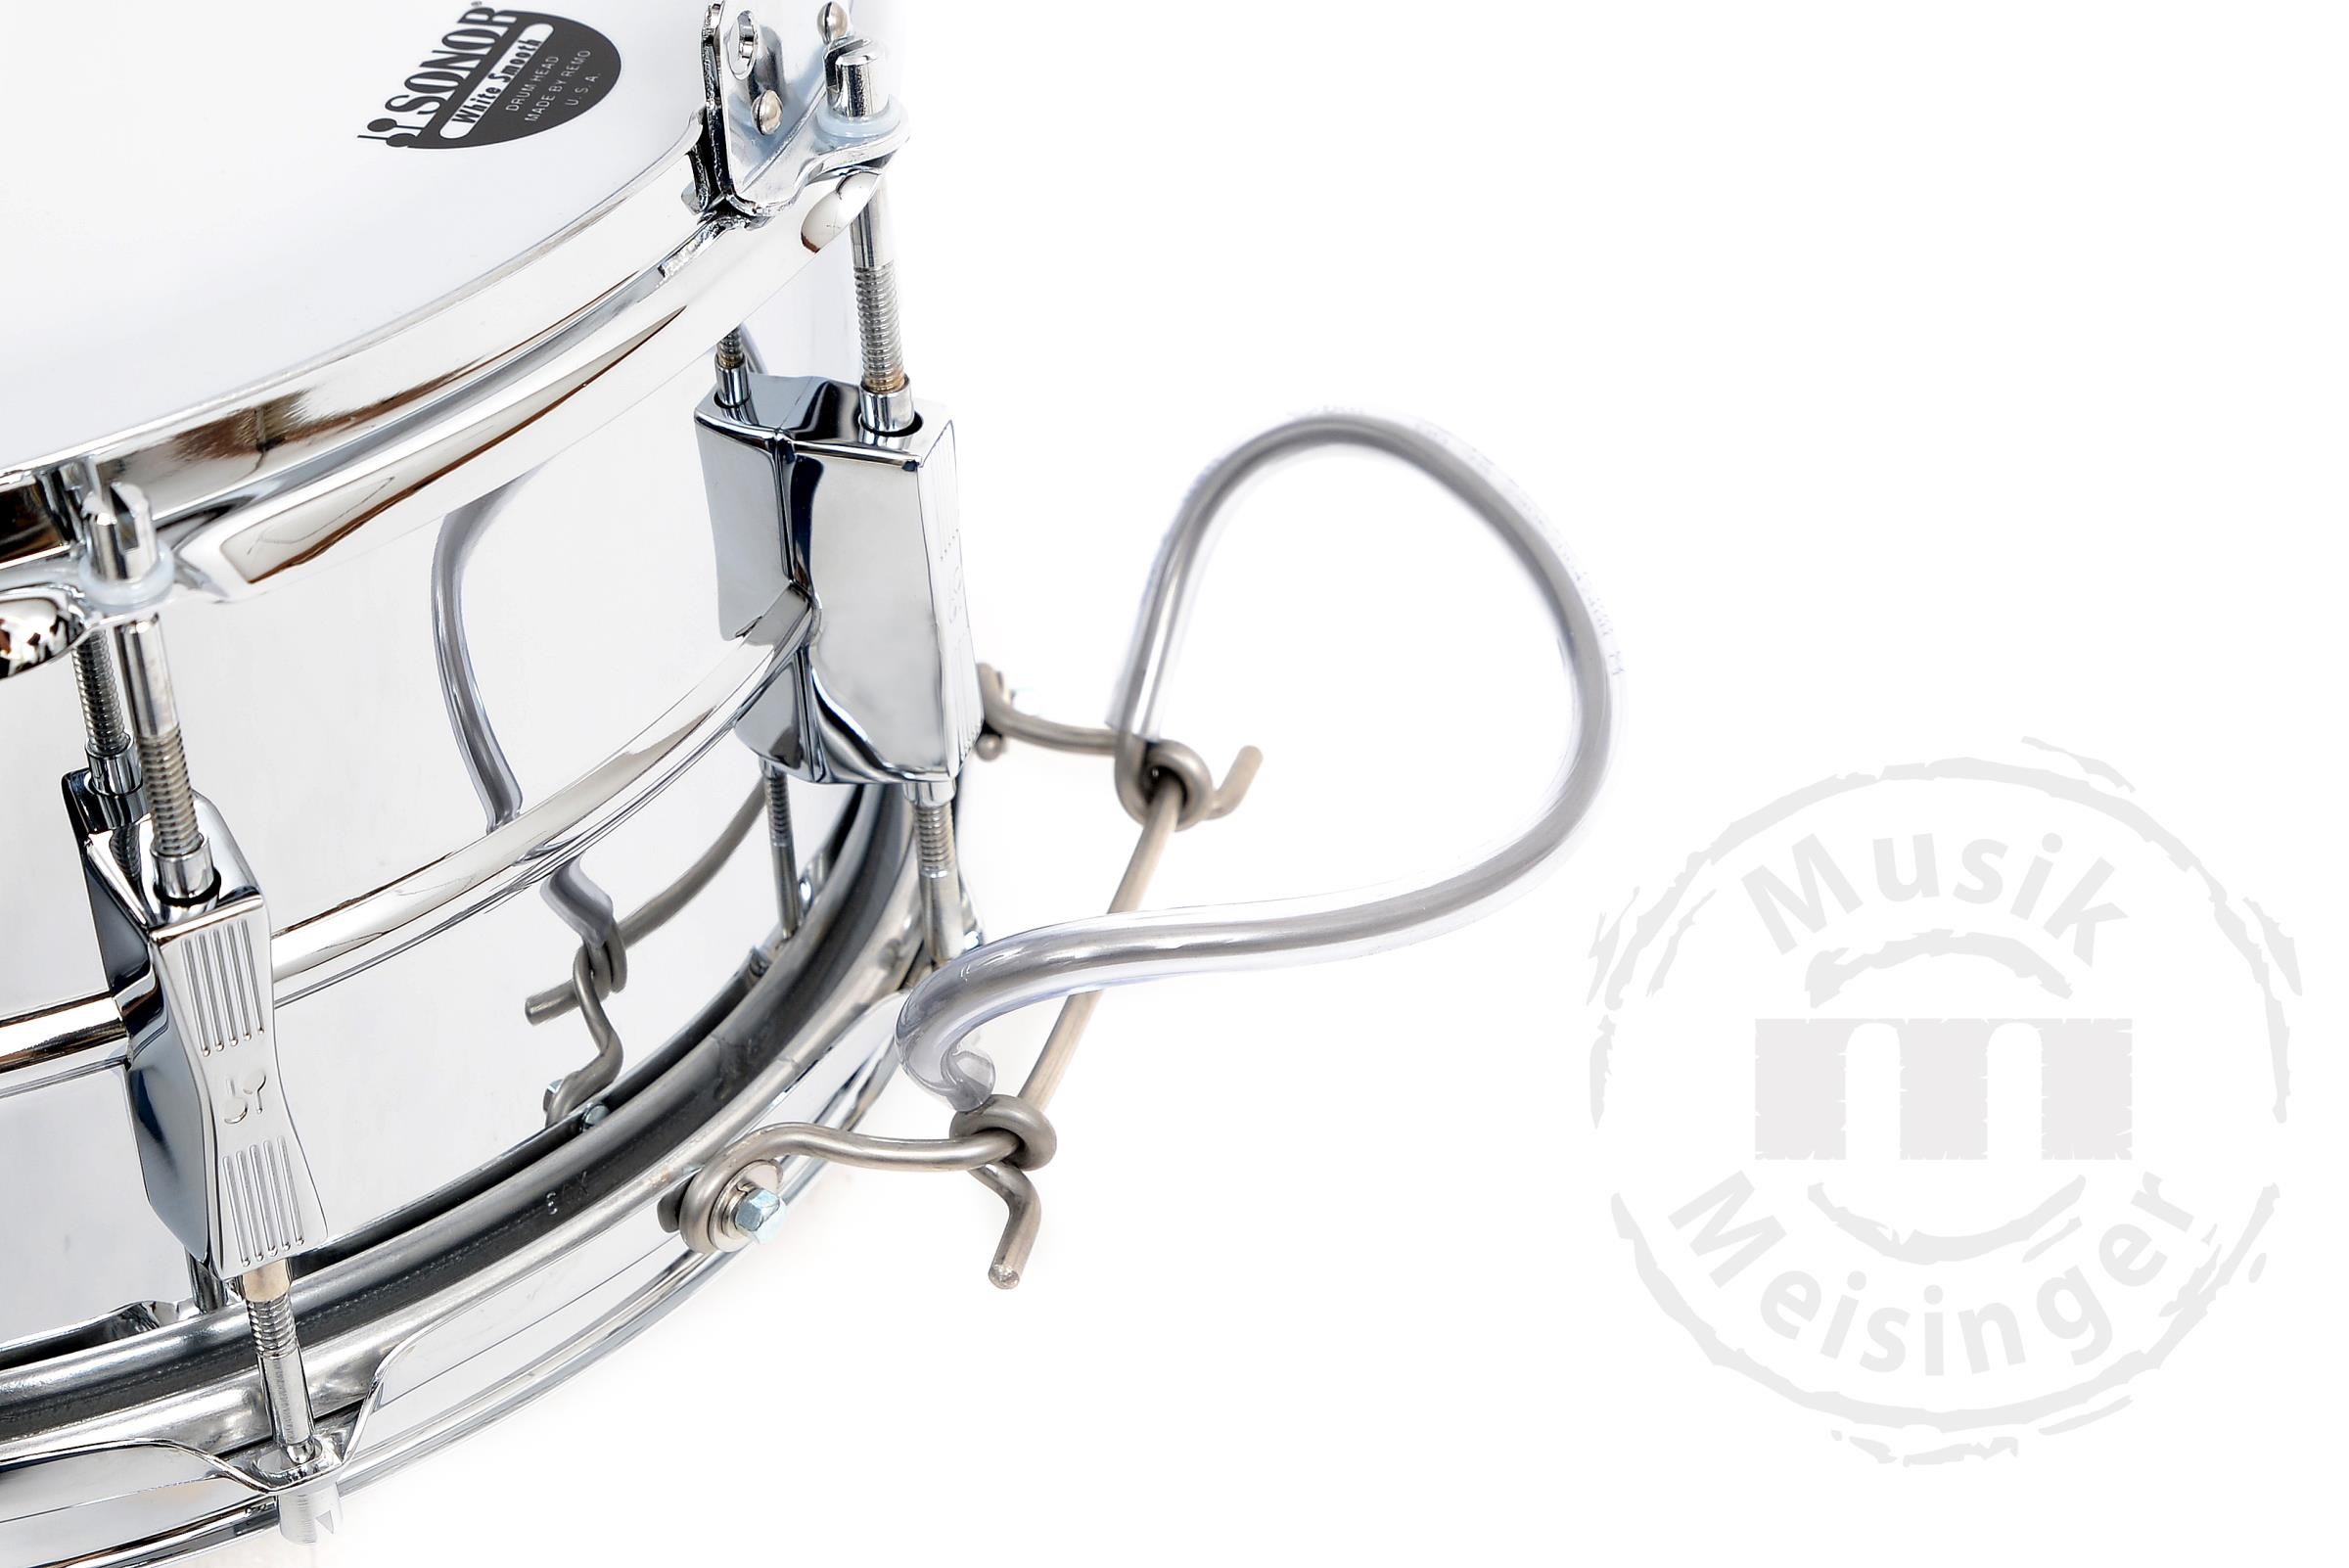 Sonor MP454 Marching Snare Drum